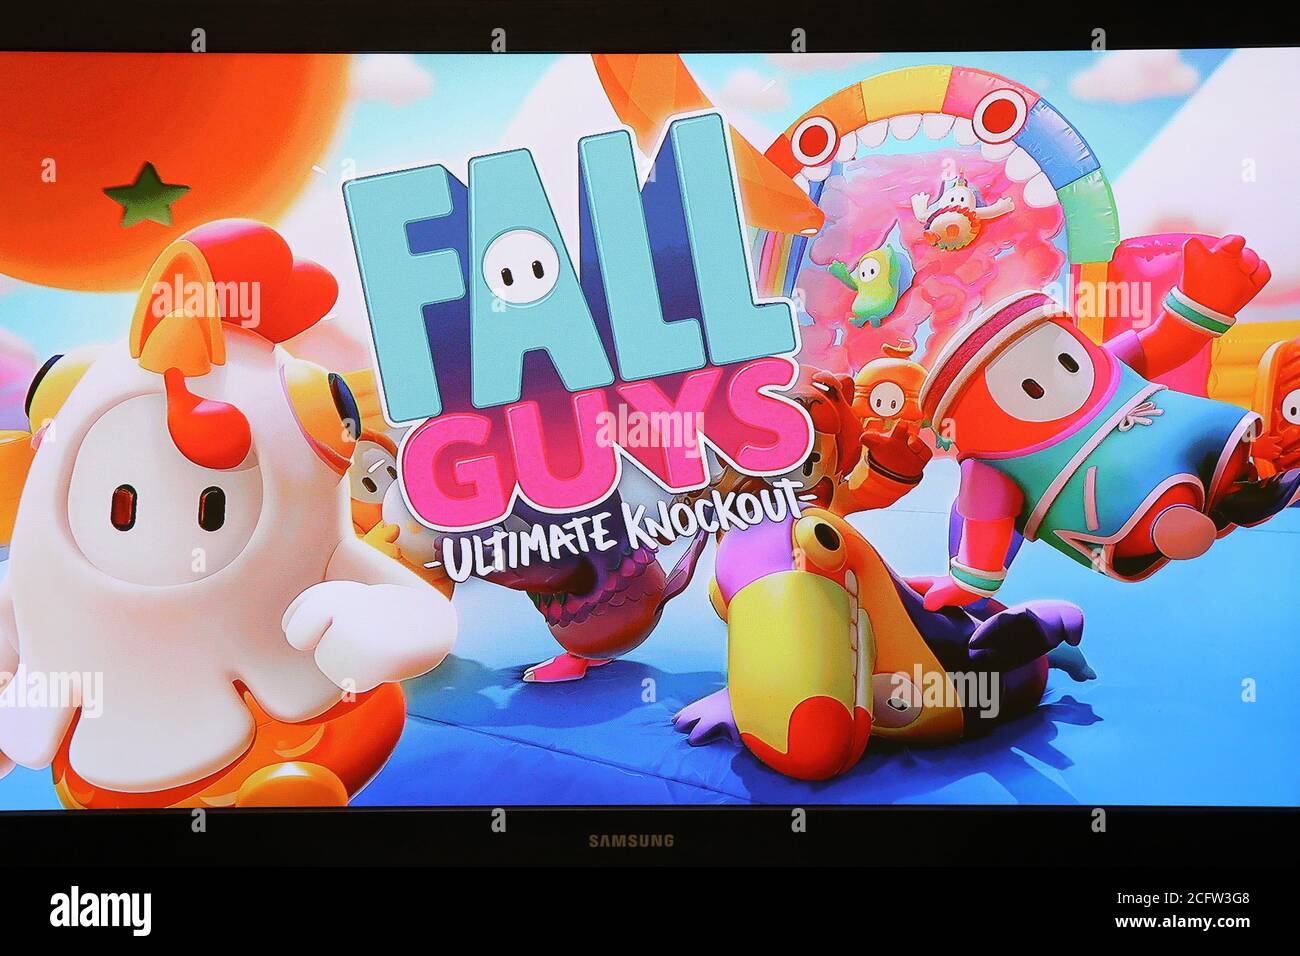 Fall Guys Ultimate Knockout game for PS4. Fall Guys Ultimate Knockout for  the PS4 is trending in the Summer/Fall of 2020. After one month of being  released, Fall Guys has aquired over